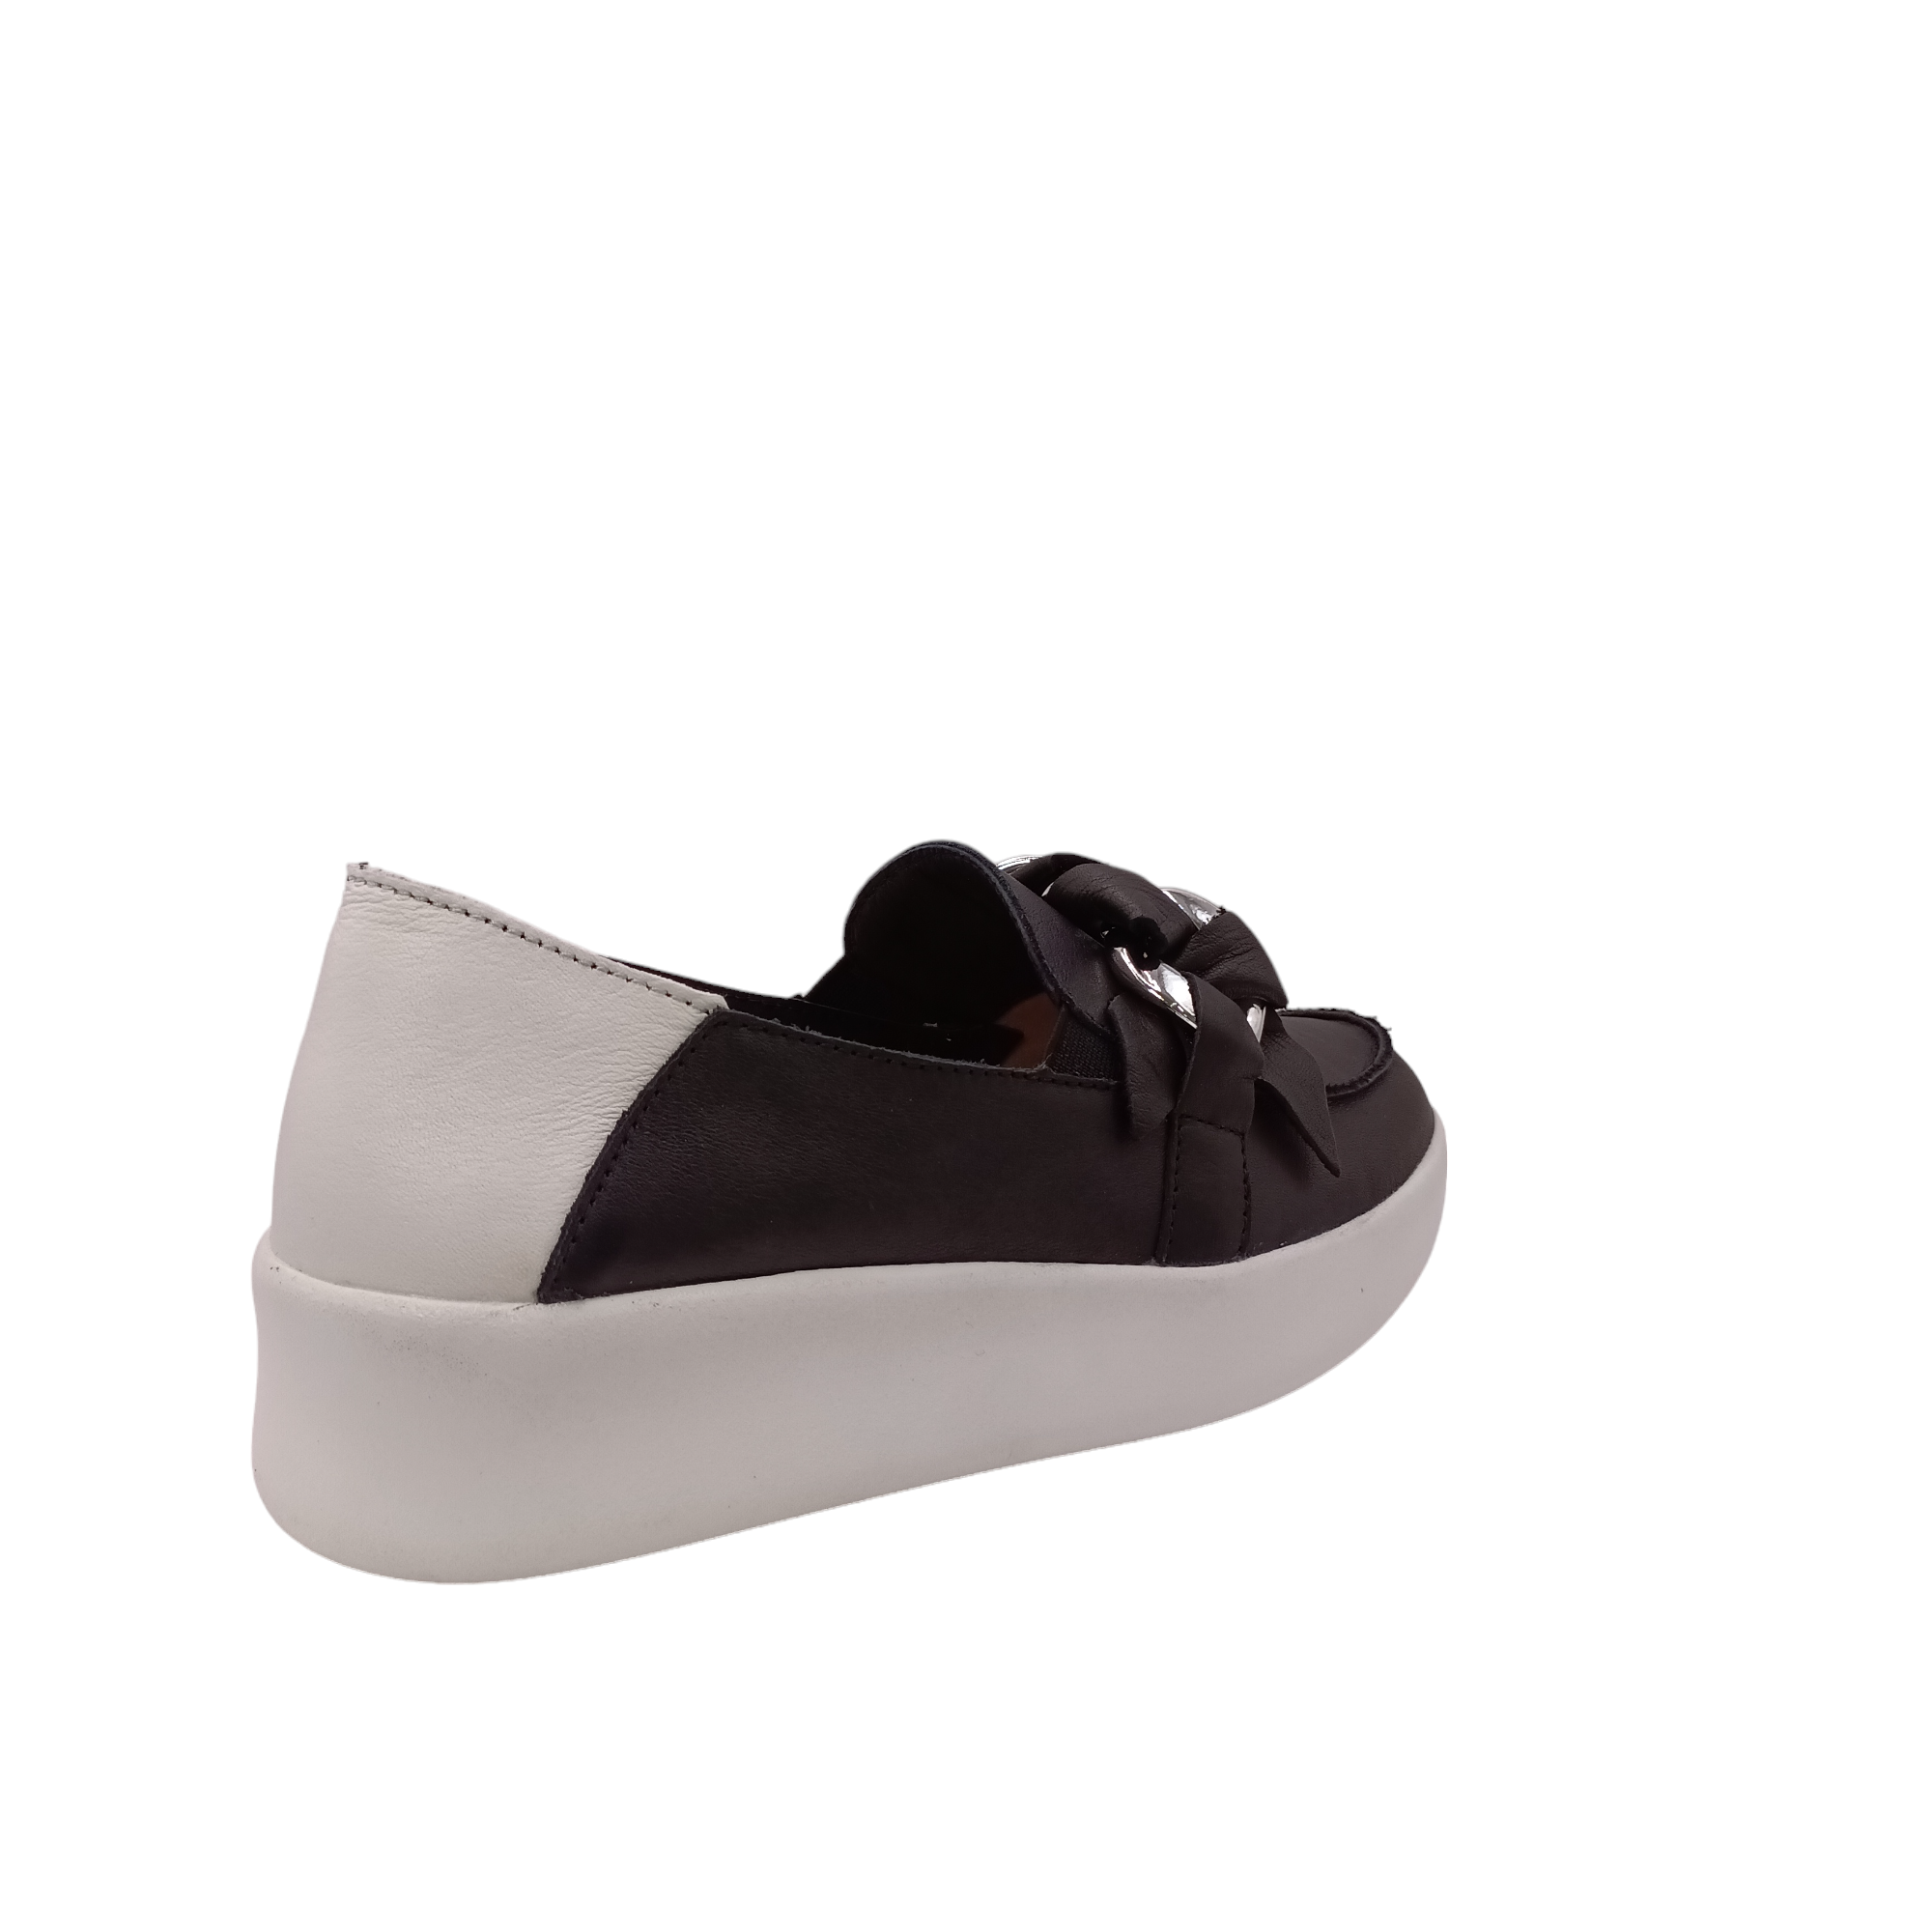 Back angled view of black slip on shoe called mafia from Alfie & Evie. Black leather laced in silver chain decorating the top, white leather heel with a white sole. Shop Alfie & Evie Womens Shoes online and In-Store with shoe&me Mount Maunganui.